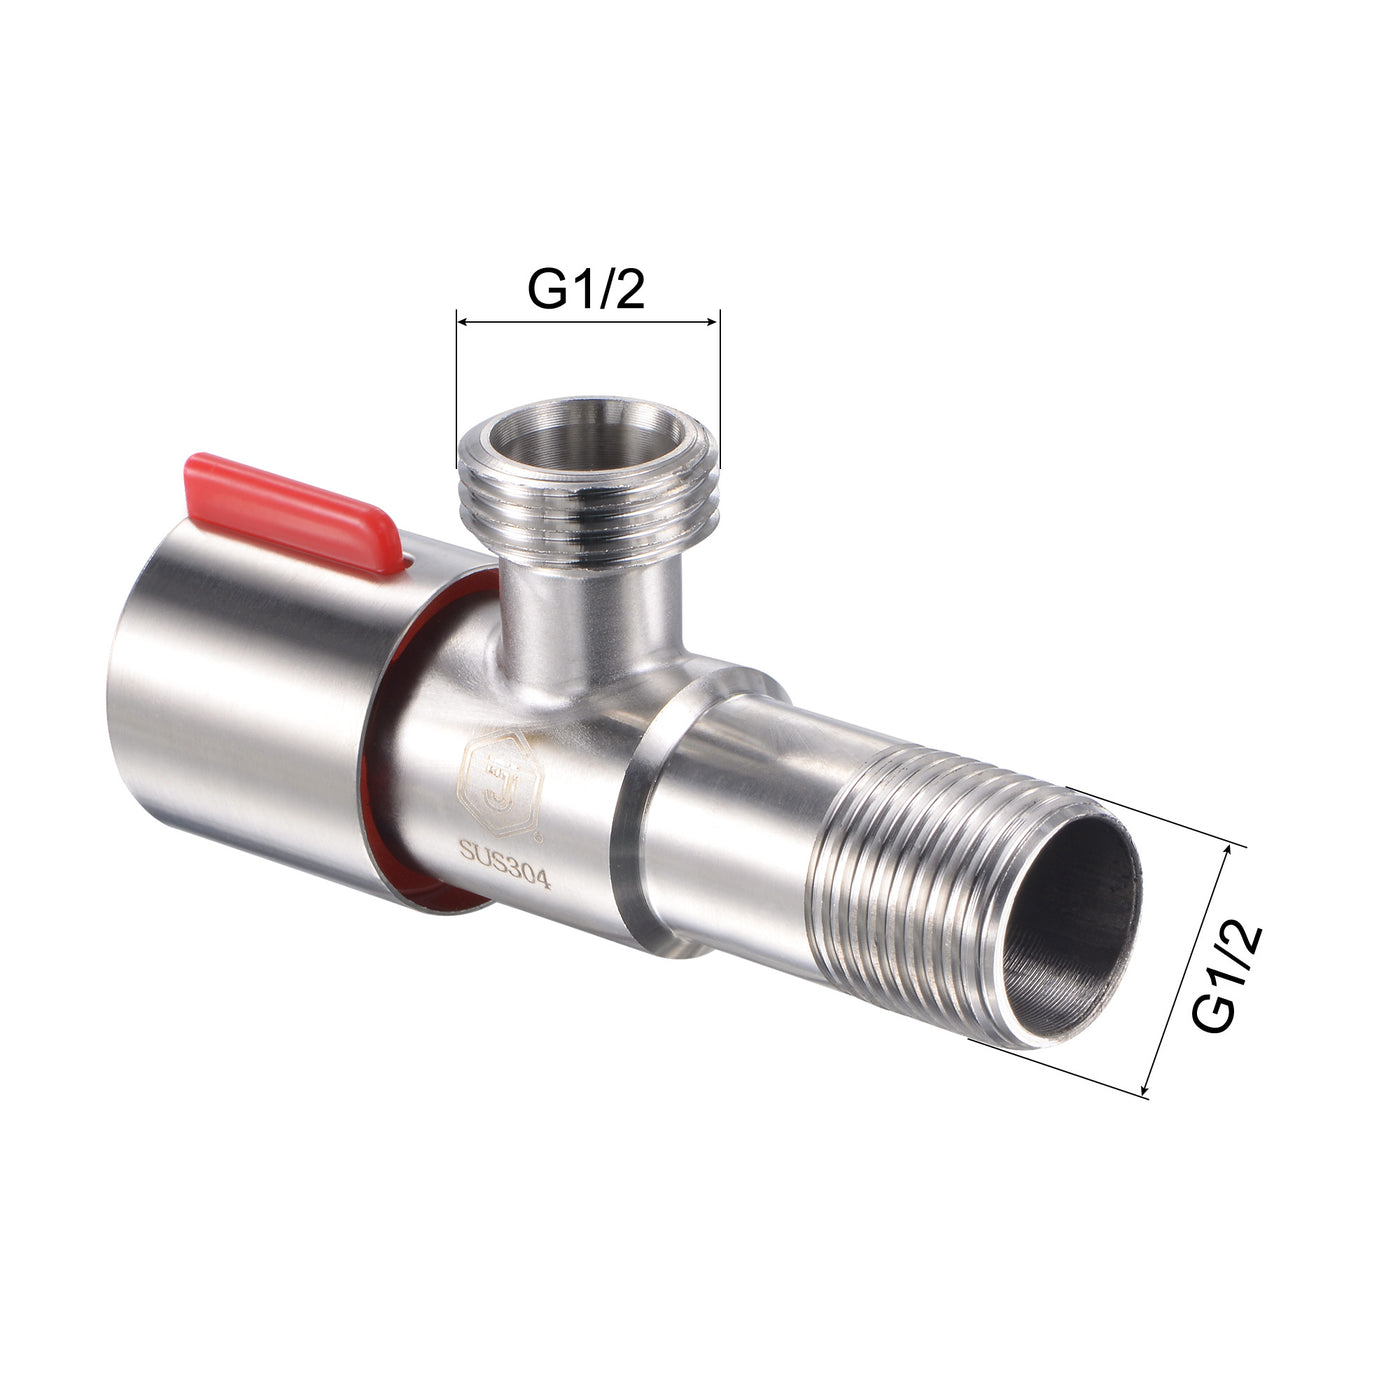 Uxcell Uxcell Angle Valve Water Stop Valve G1/2 Male Thread 2 Ways 304 Stainless Steel Red with Ornament Cover and Faucet Supply Line